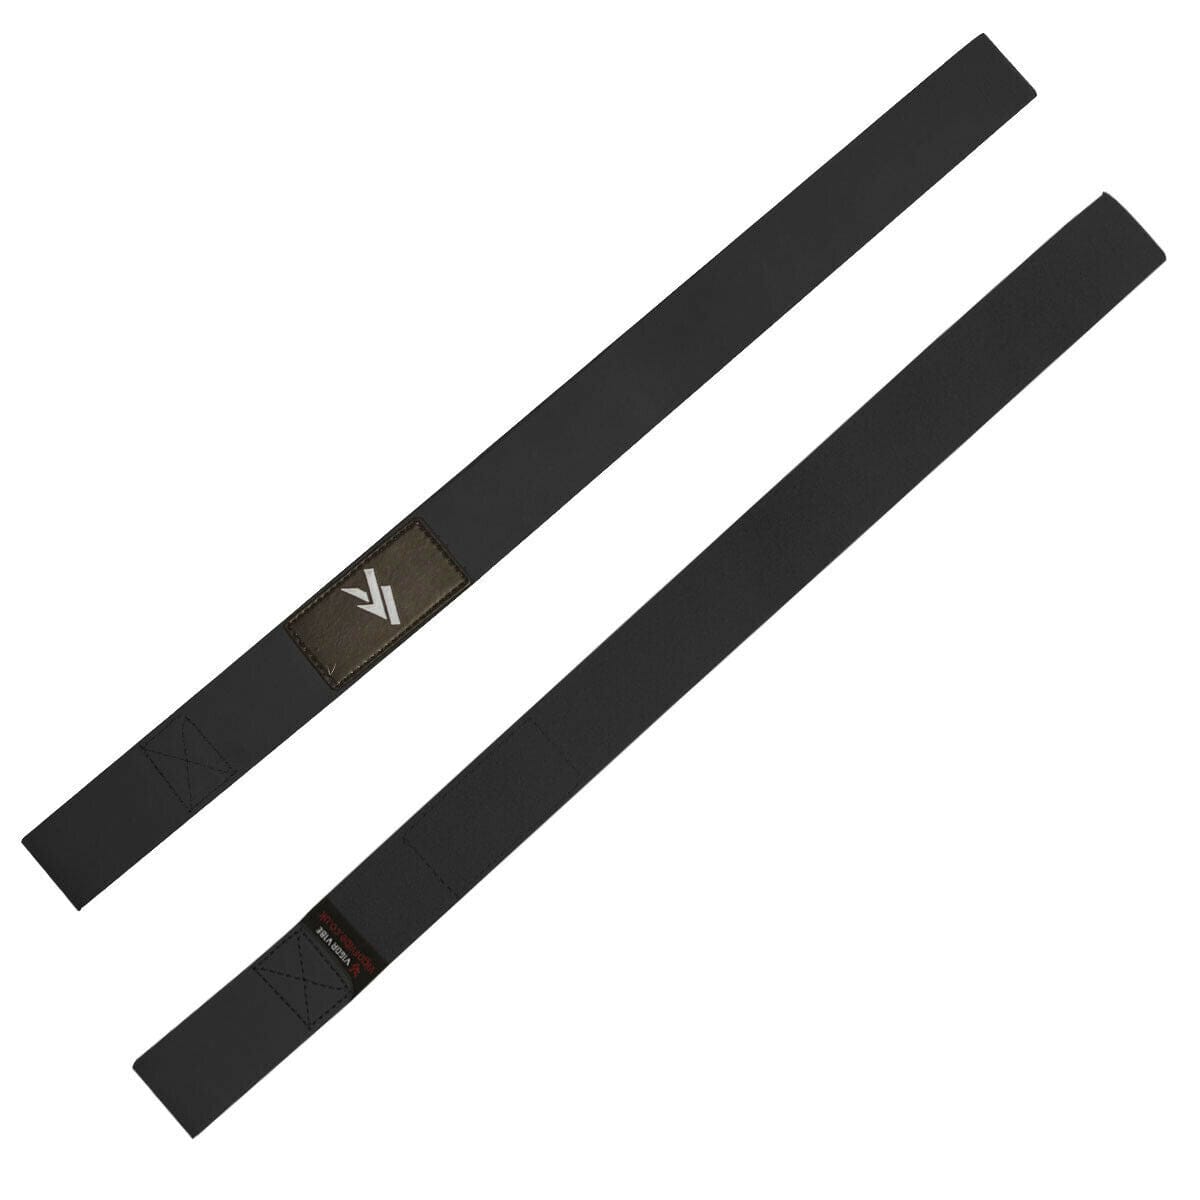 Weight Lifting Leather Wrist Straps Black Pair For Work out Gym & Training